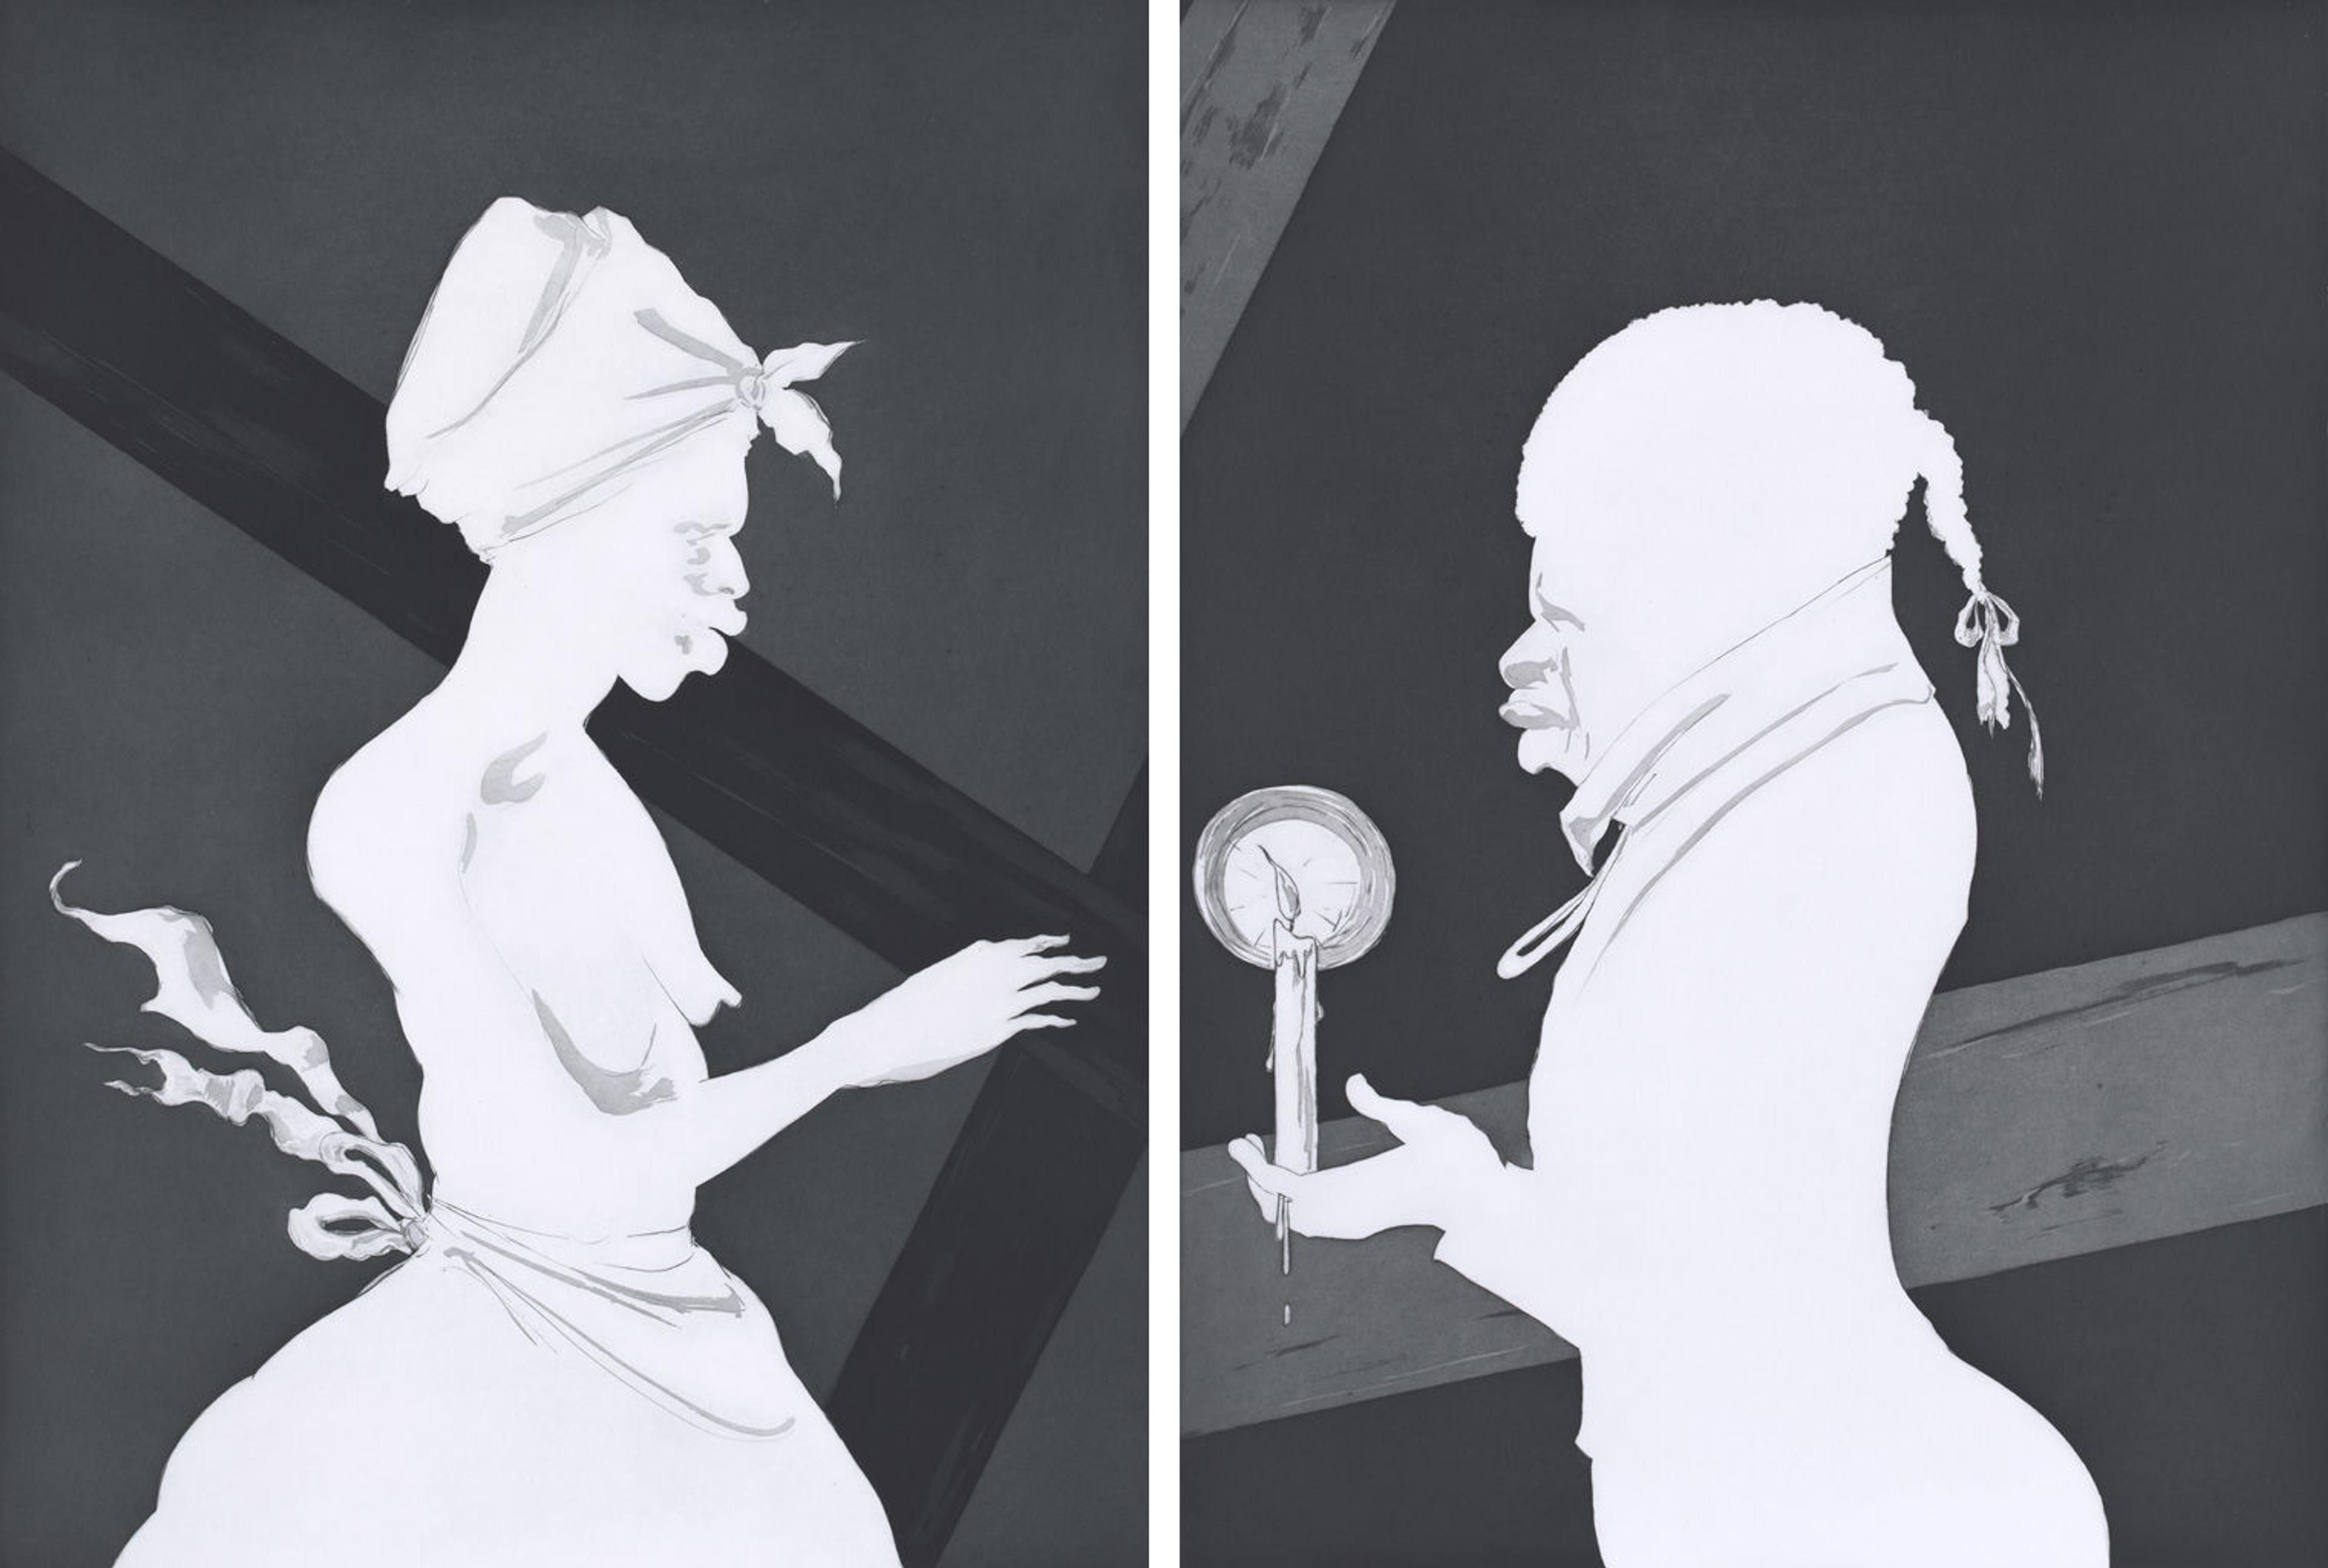 Left and right panels of a paper triptych by Kara Walker showing profile portraits of a woman and man, respectively